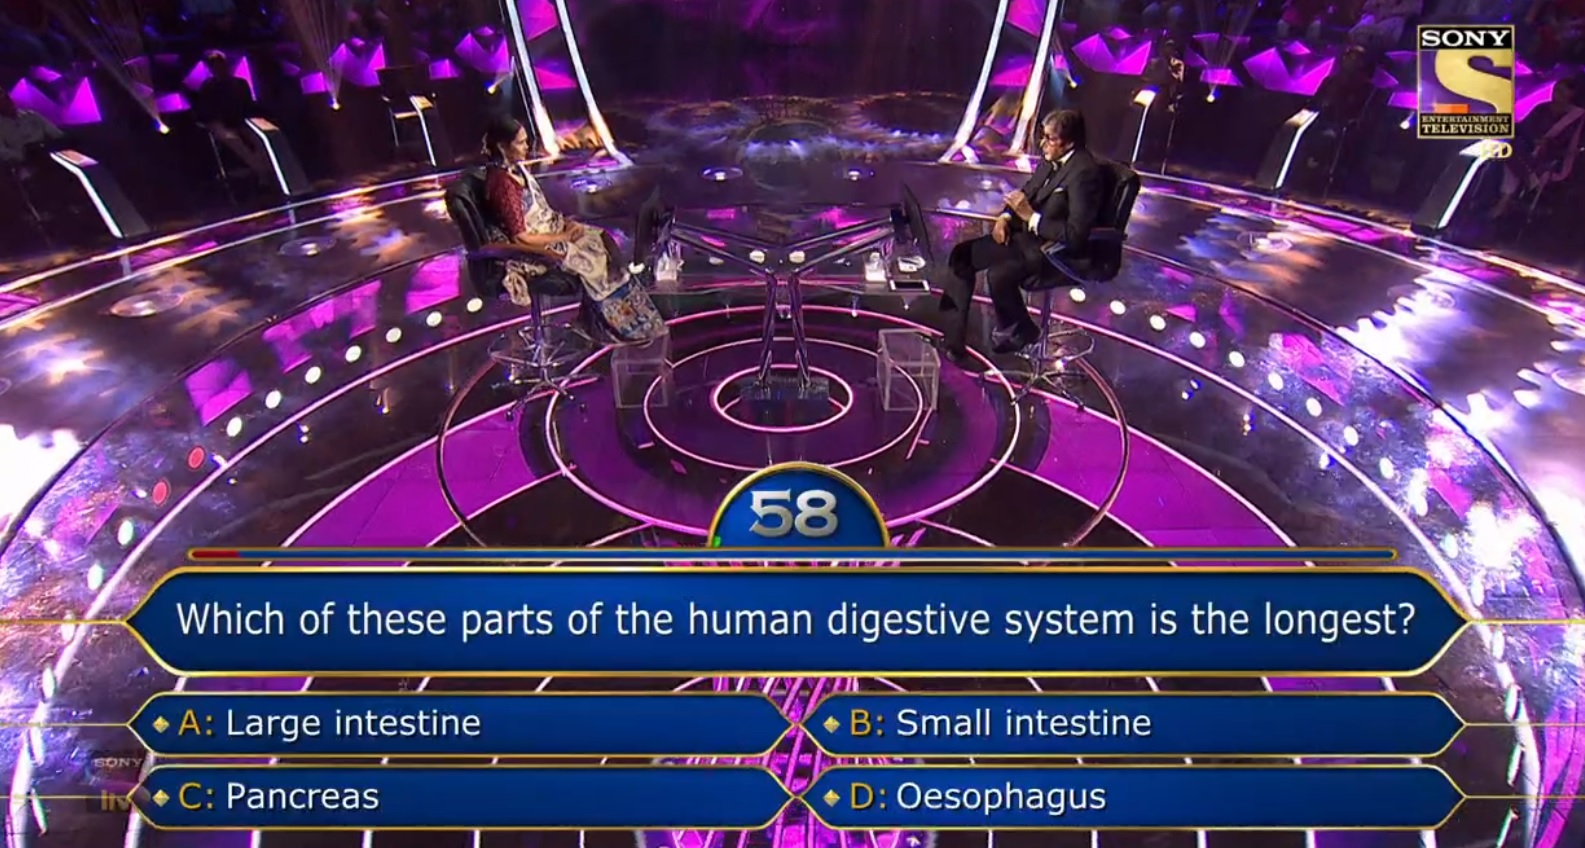 Ques : Which of these parts of the human digestive system is the longest?